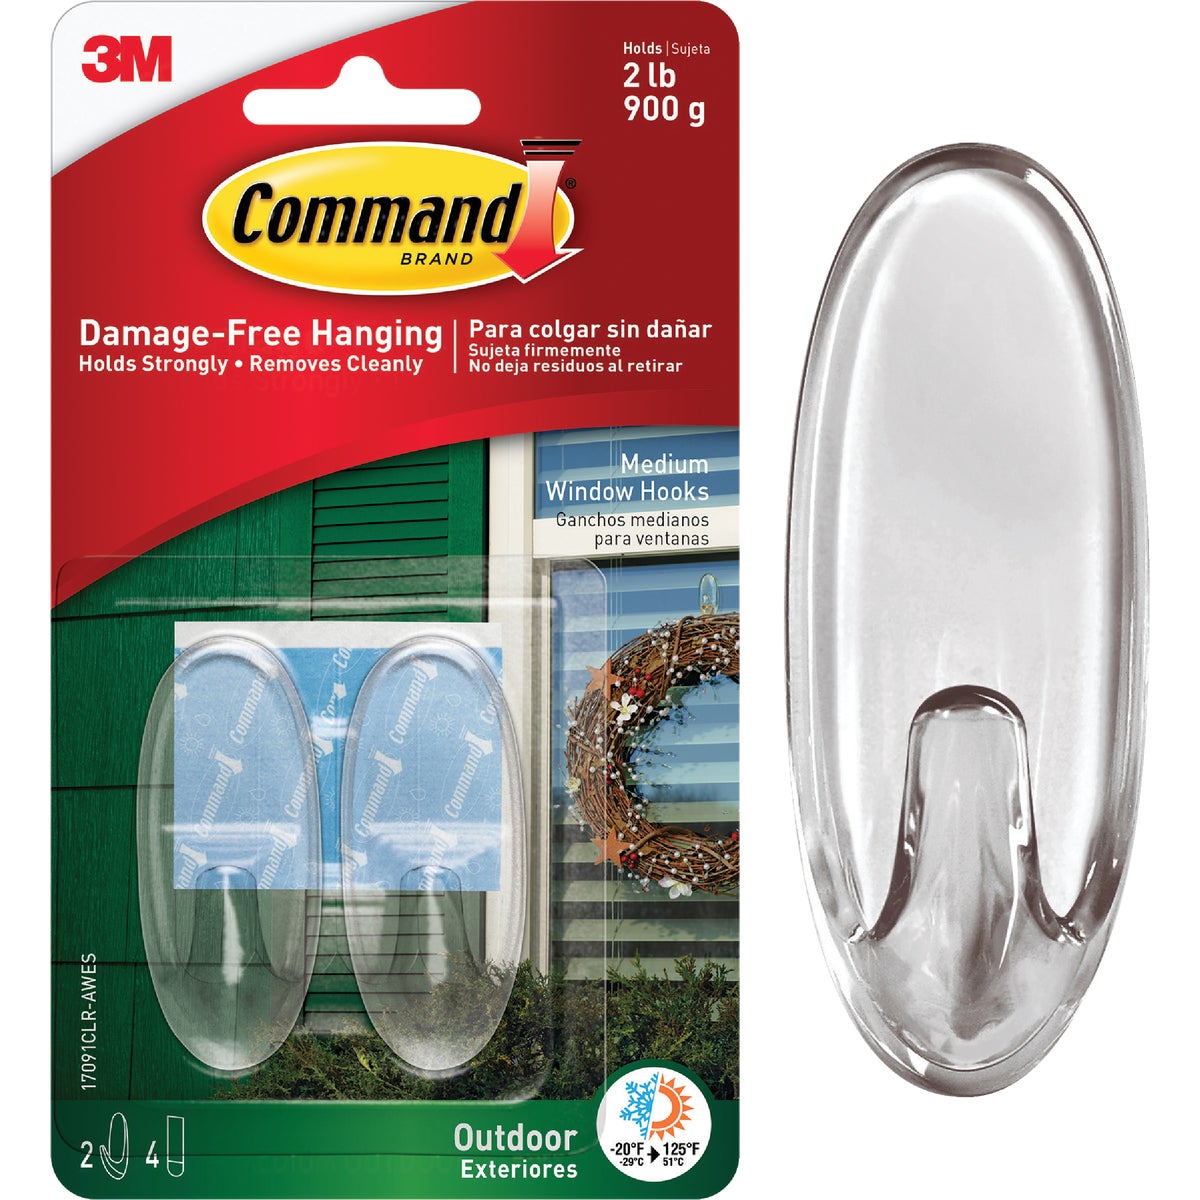 Item 242730, Command Outdoor Window Hooks are perfect for hanging wreaths, signs, 